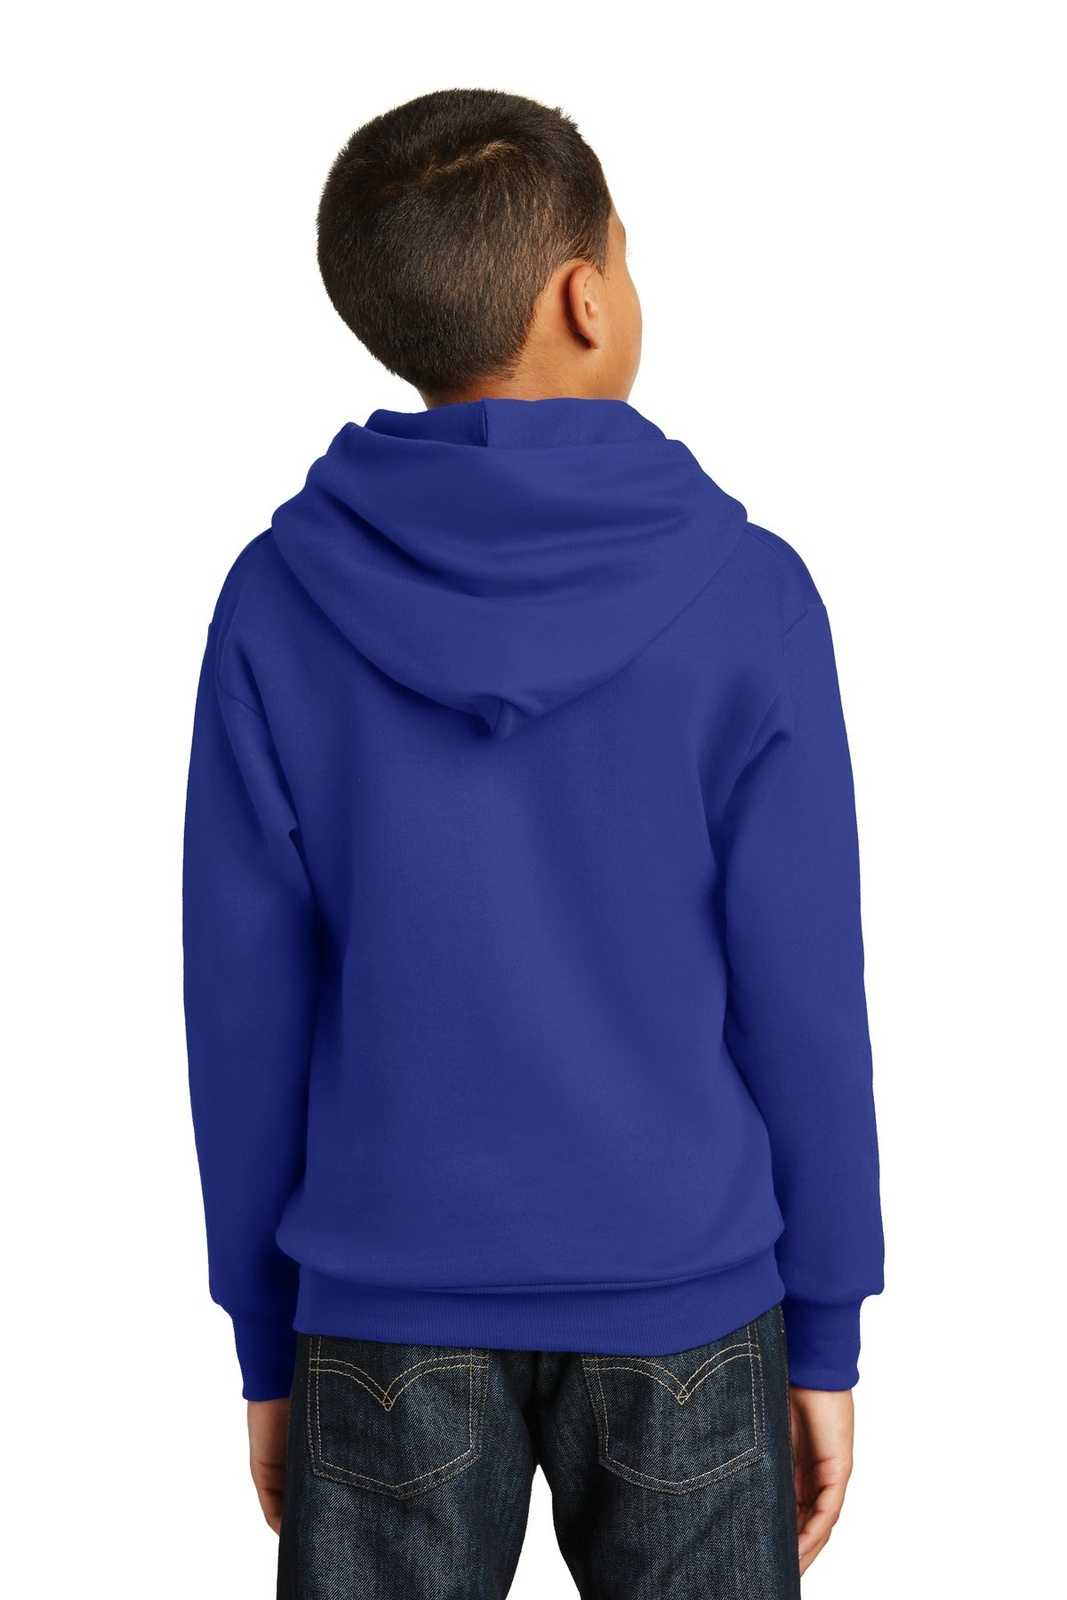 Hanes P470 Youth Ecosmart Pullover Hooded Sweatshirt - Deep Royal - HIT a Double - 2